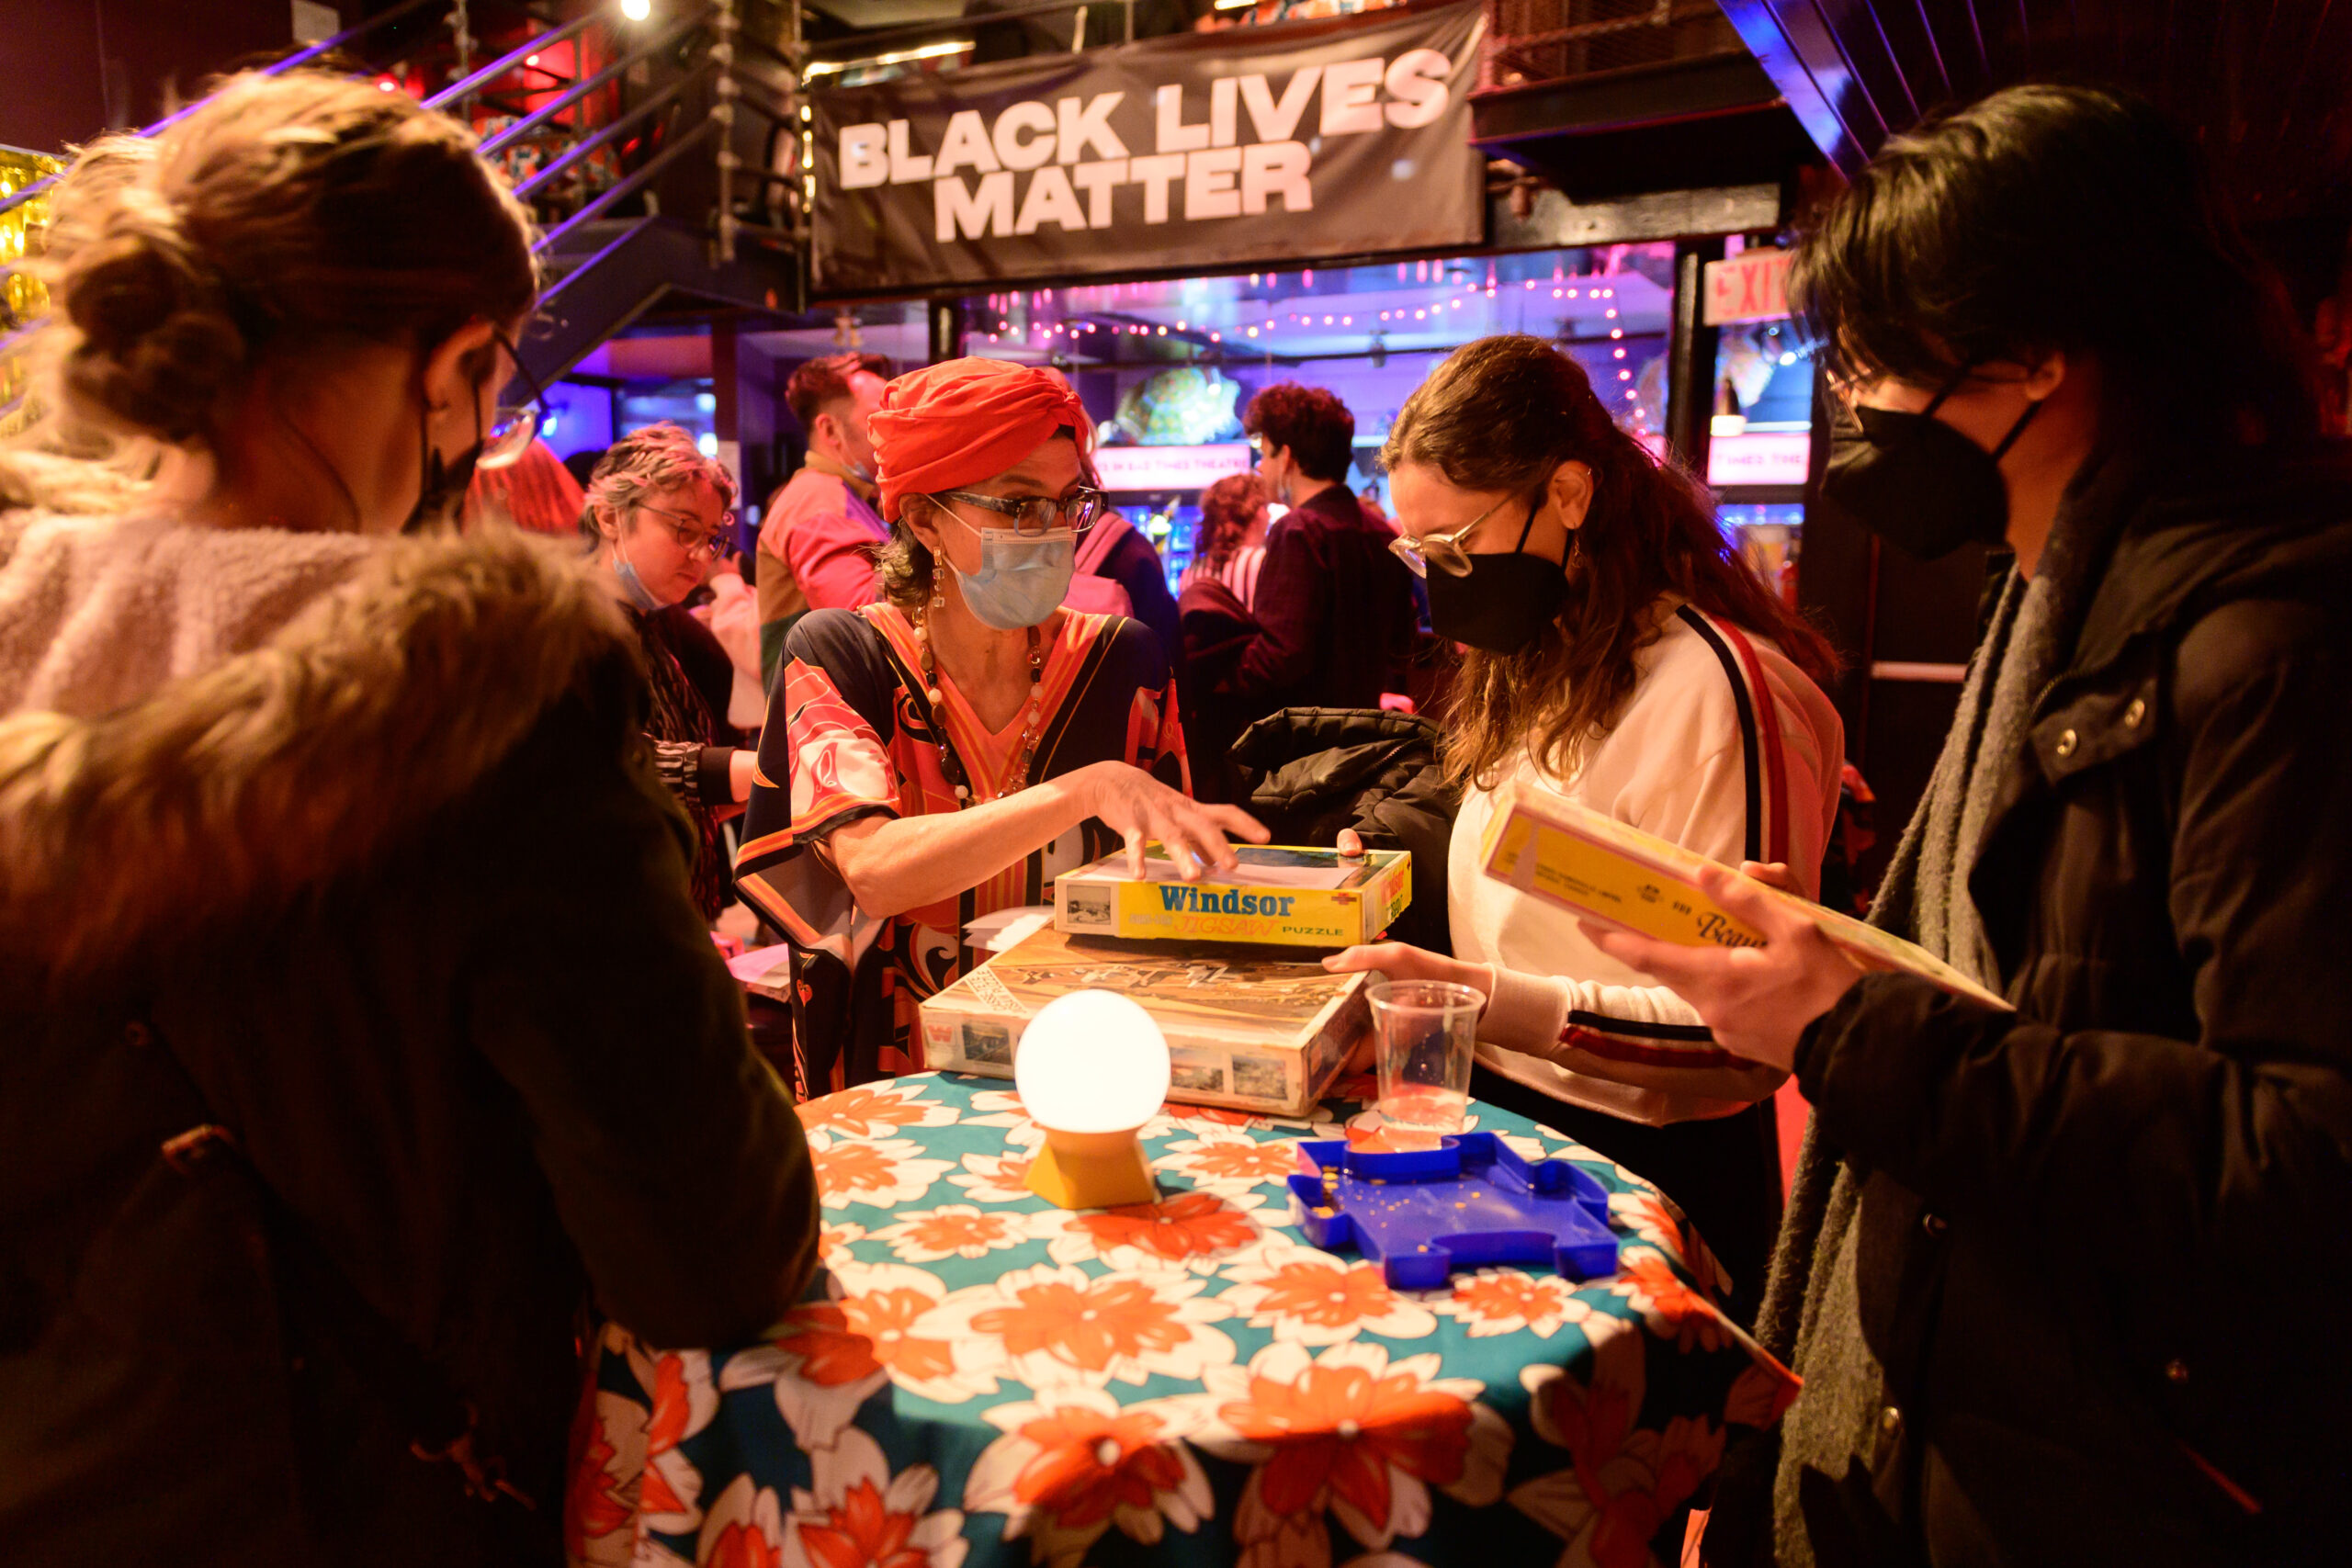 Image of a masked artist holding a puzzle and engaging with audience members in the Cabaret’s Puzzle Lounge.